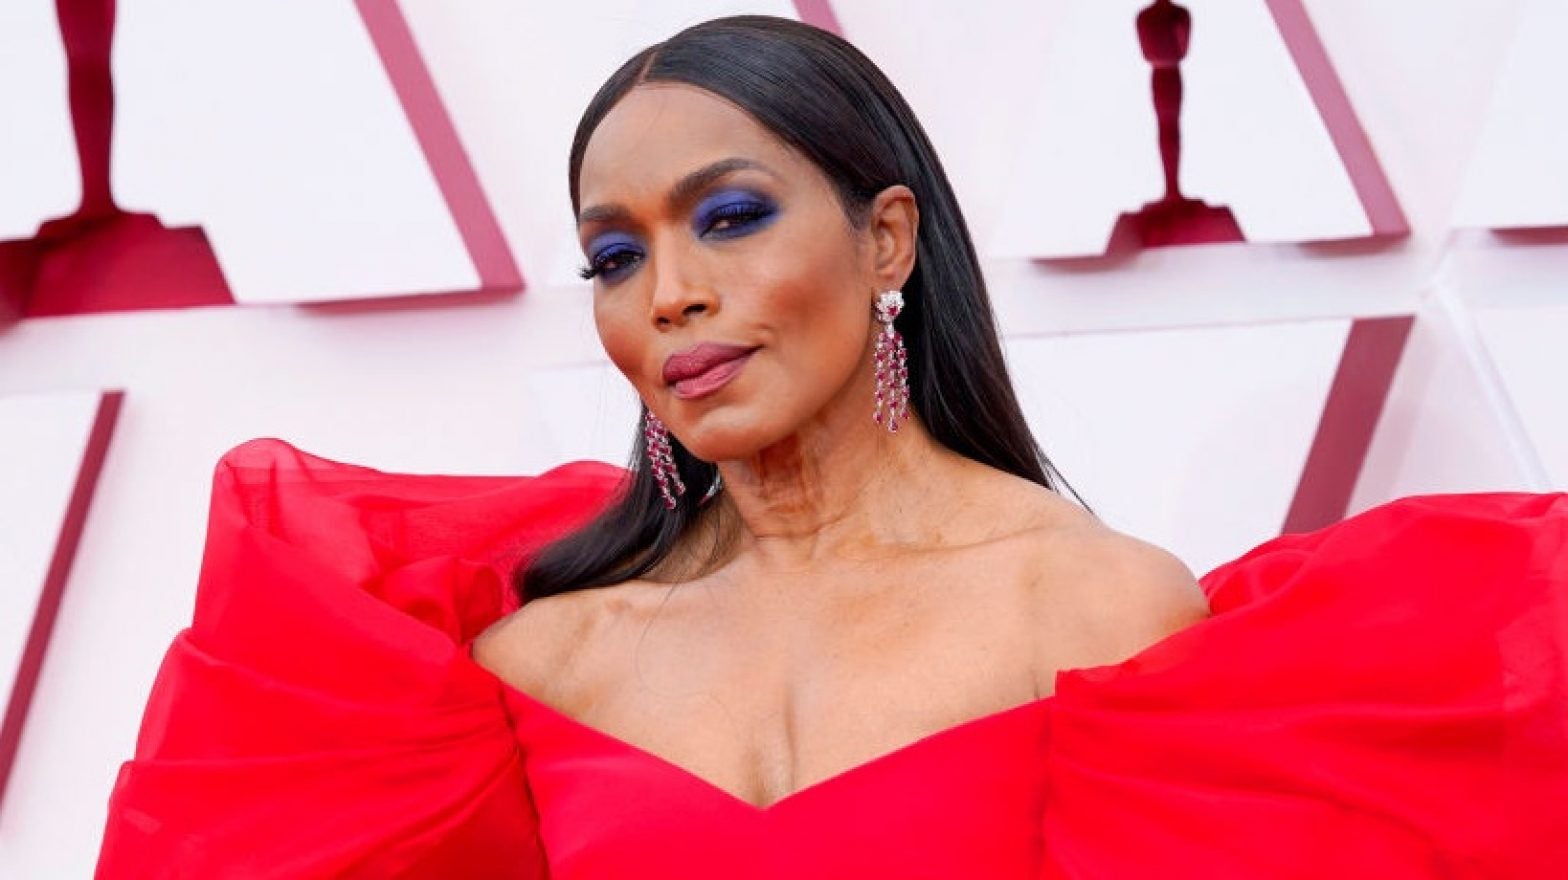 Angela Bassett Is Now One Of The Highest Paid Actresses On TV